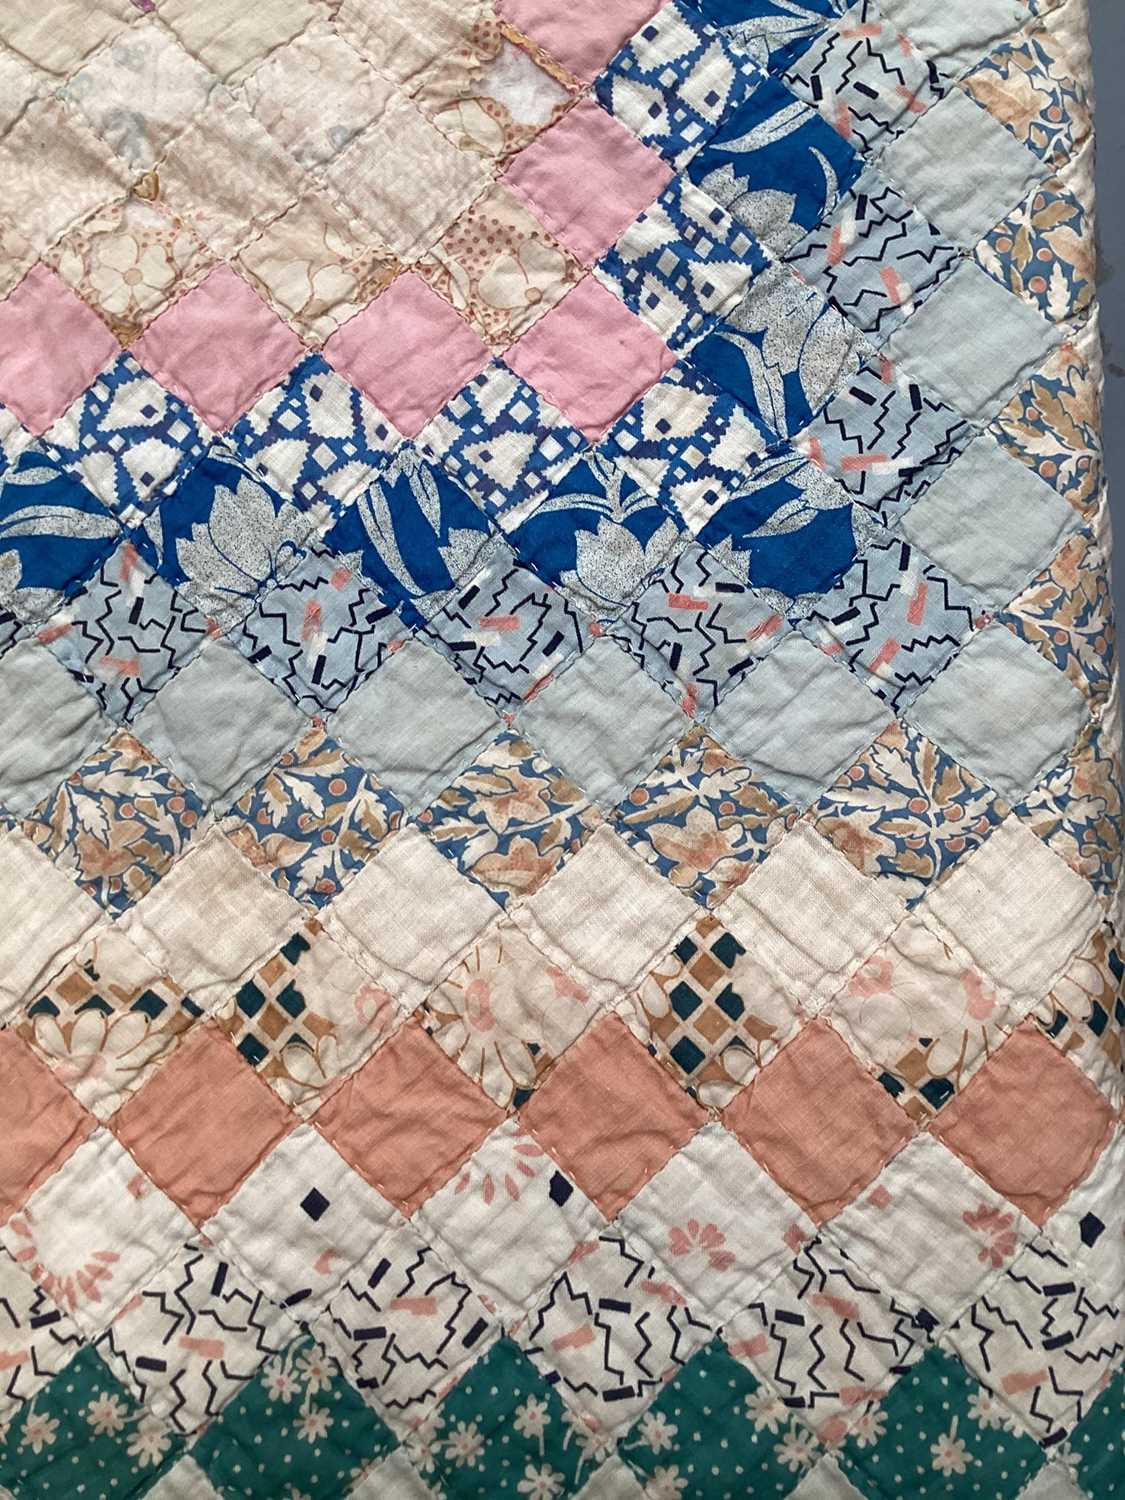 Cotton patchwork quilt 200 x 190 cms approximately c.1930's. - Image 6 of 12